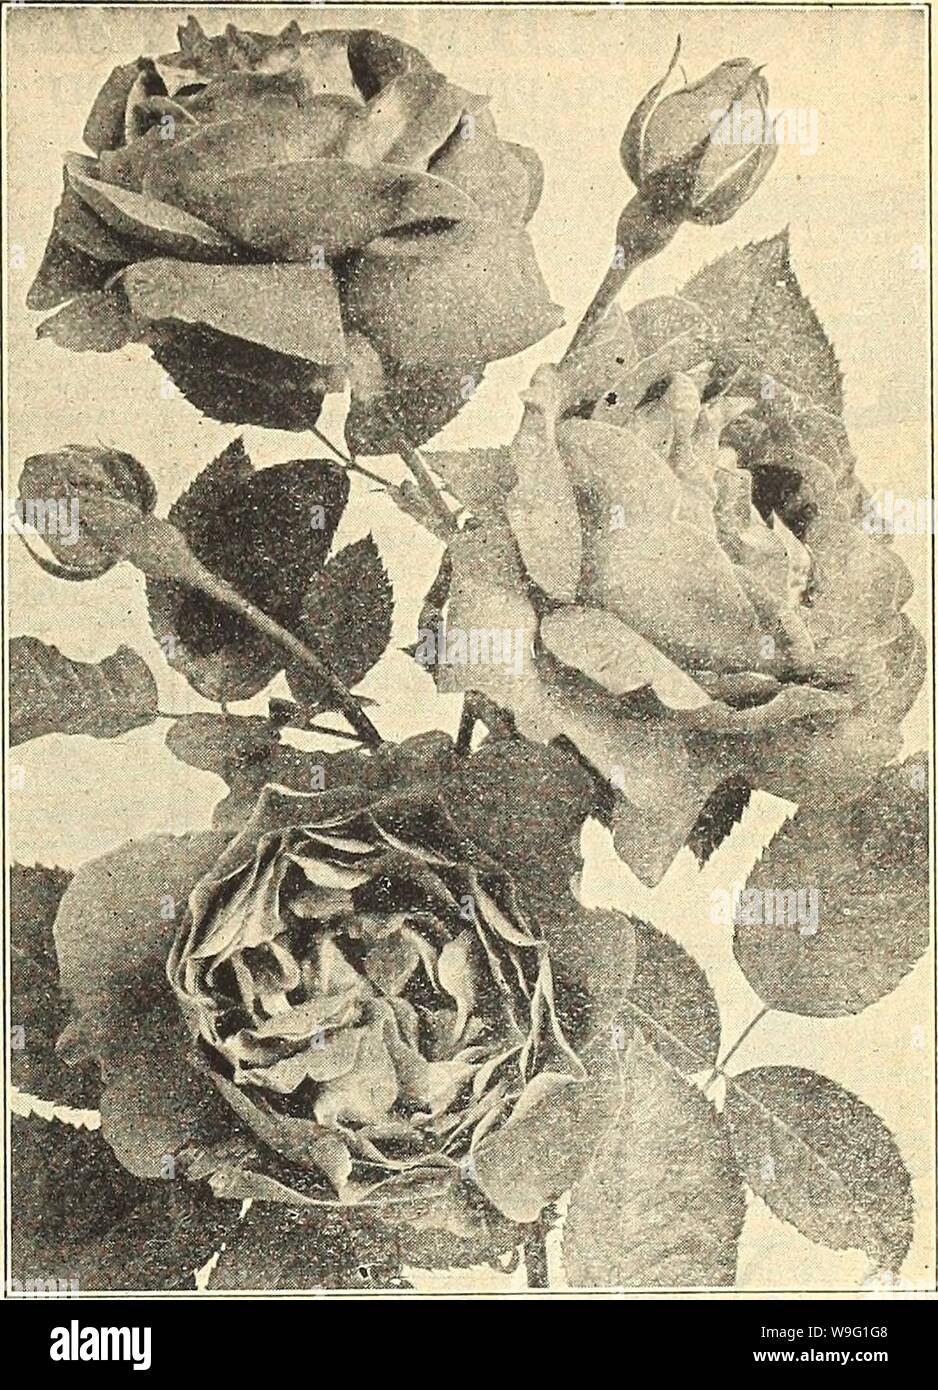 Archive image from page 92 of Currie's farm and garden annual. Currie's farm and garden annual : spring 1921 46th year  curriesfarmgarde19curr 4 Year: 1921 ( LIST OF ROSES, ETC., FOR 1921. 87 ROSES perfect form, a the best known large and beau- Baroness RothschildâImmense globular flowers, rich satiny pink, very vigorous and a free bloomer. Baronne de BonstcttcnâVelvety blackish crimson, very large, dou- ble, fragrant flowers, string, vigorous grower. Fran Karl DruschkiâThe ideal hardy white rose, very free bloomer. tiruenii JacqueminotâBrilliant velvety red, one of roses under cultivation, fr Stock Photo